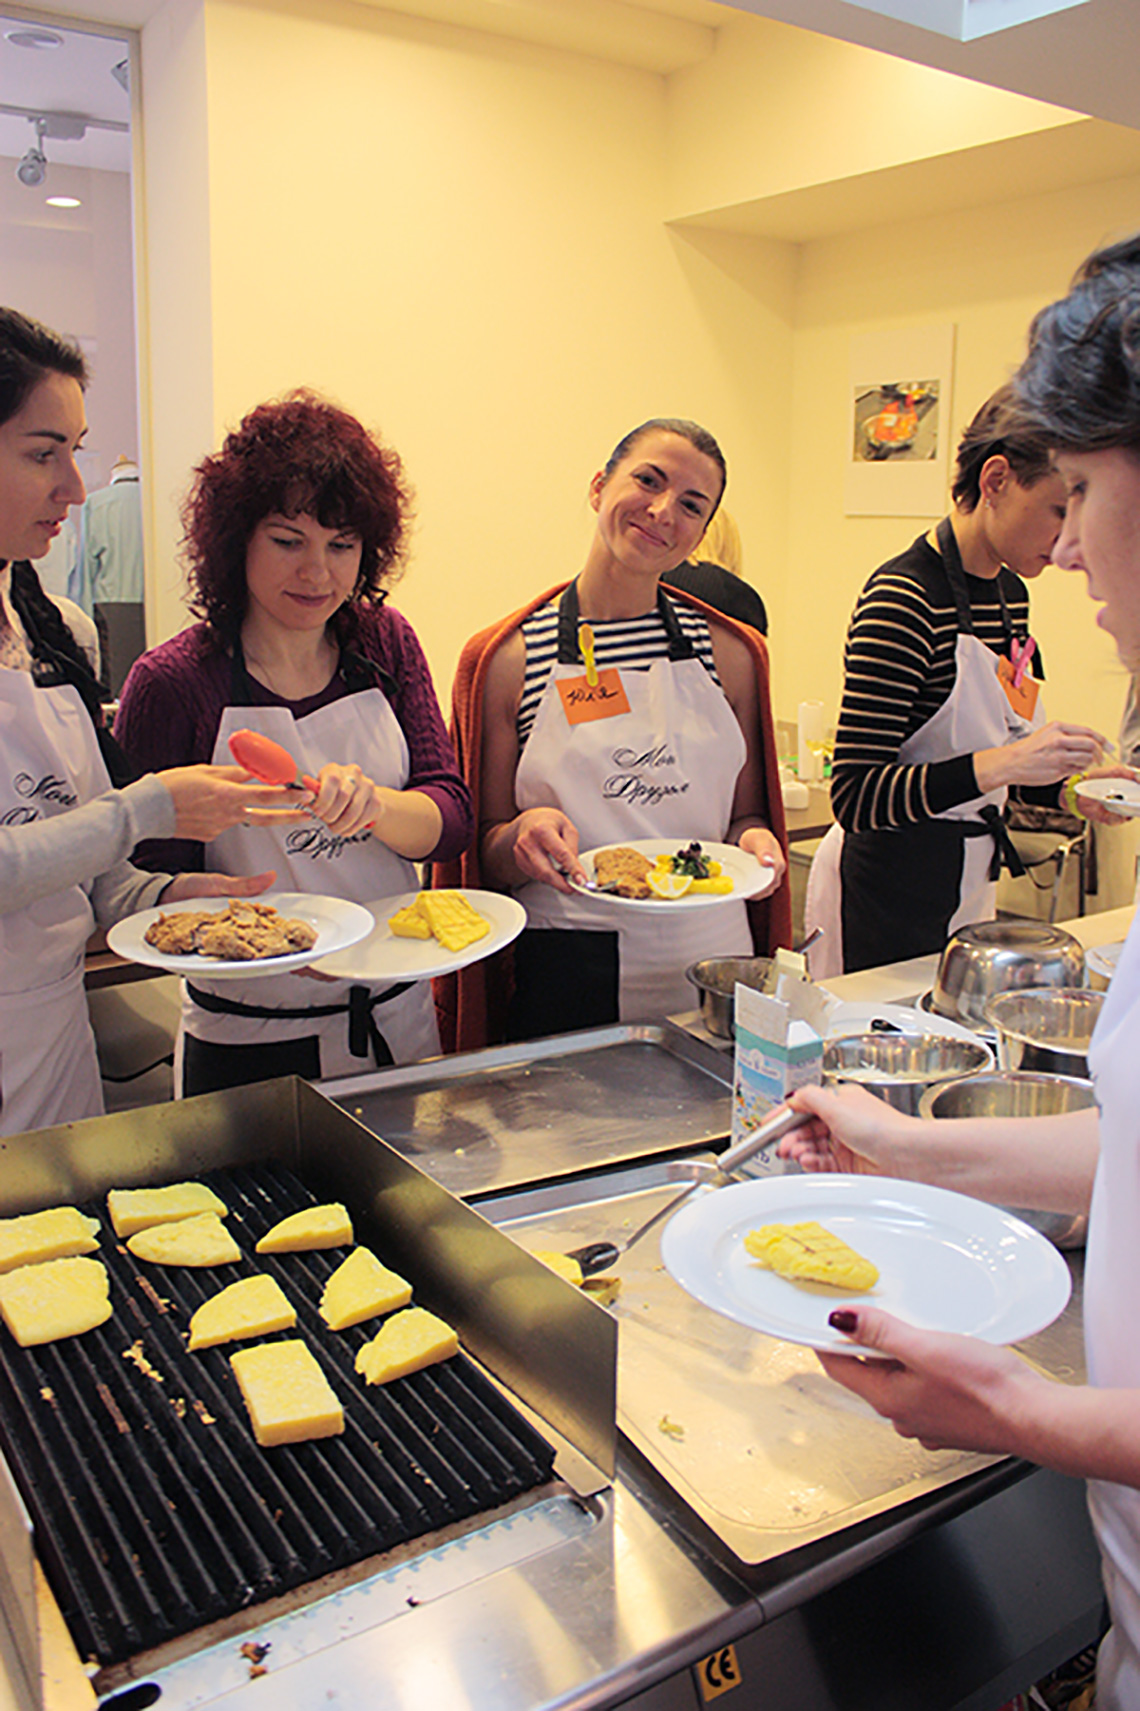 How to cook polenta. Course "Culinary Traditions of Northern Italy". Cooking school in Ukraine.